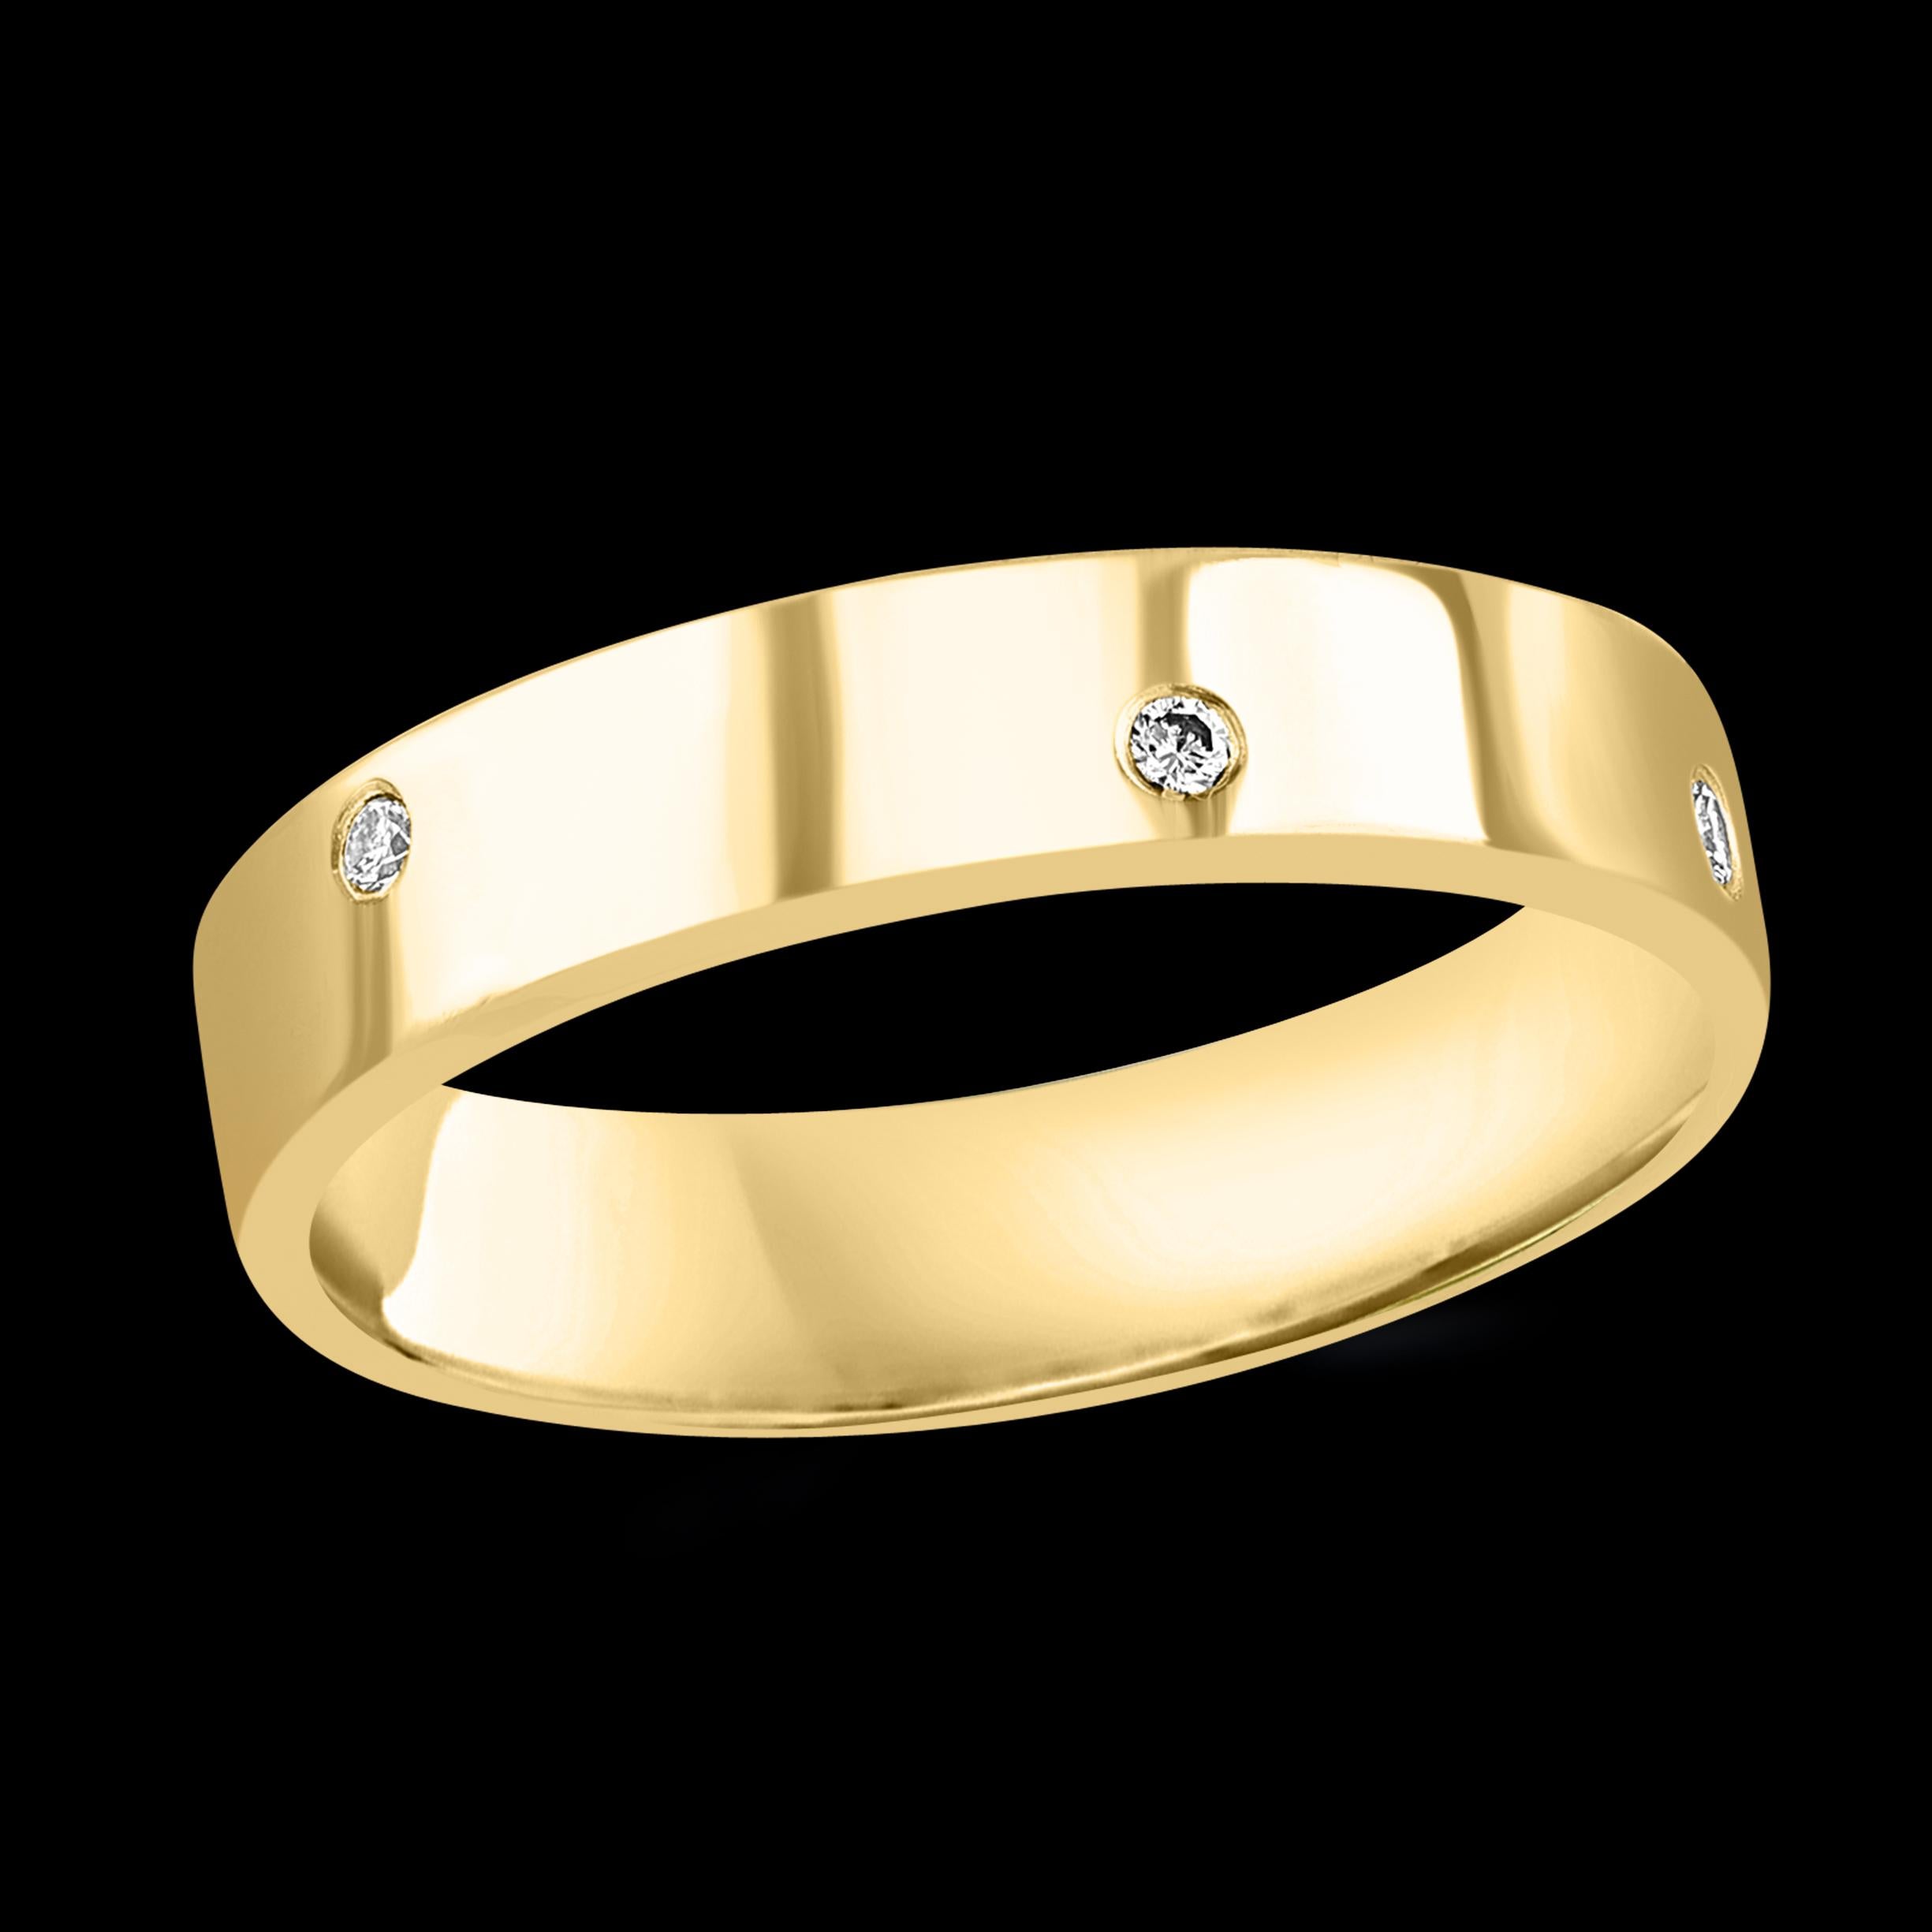 6 Flush Set Bezel Diamond Eternity Wedding Band in 14 Karat Yellow Gold Size 9
Very clean and shiny diamonds.
This eternity band features Gypsy set or burnished, the bright white diamonds , 14k gold band ring shines brightly and is a perennial